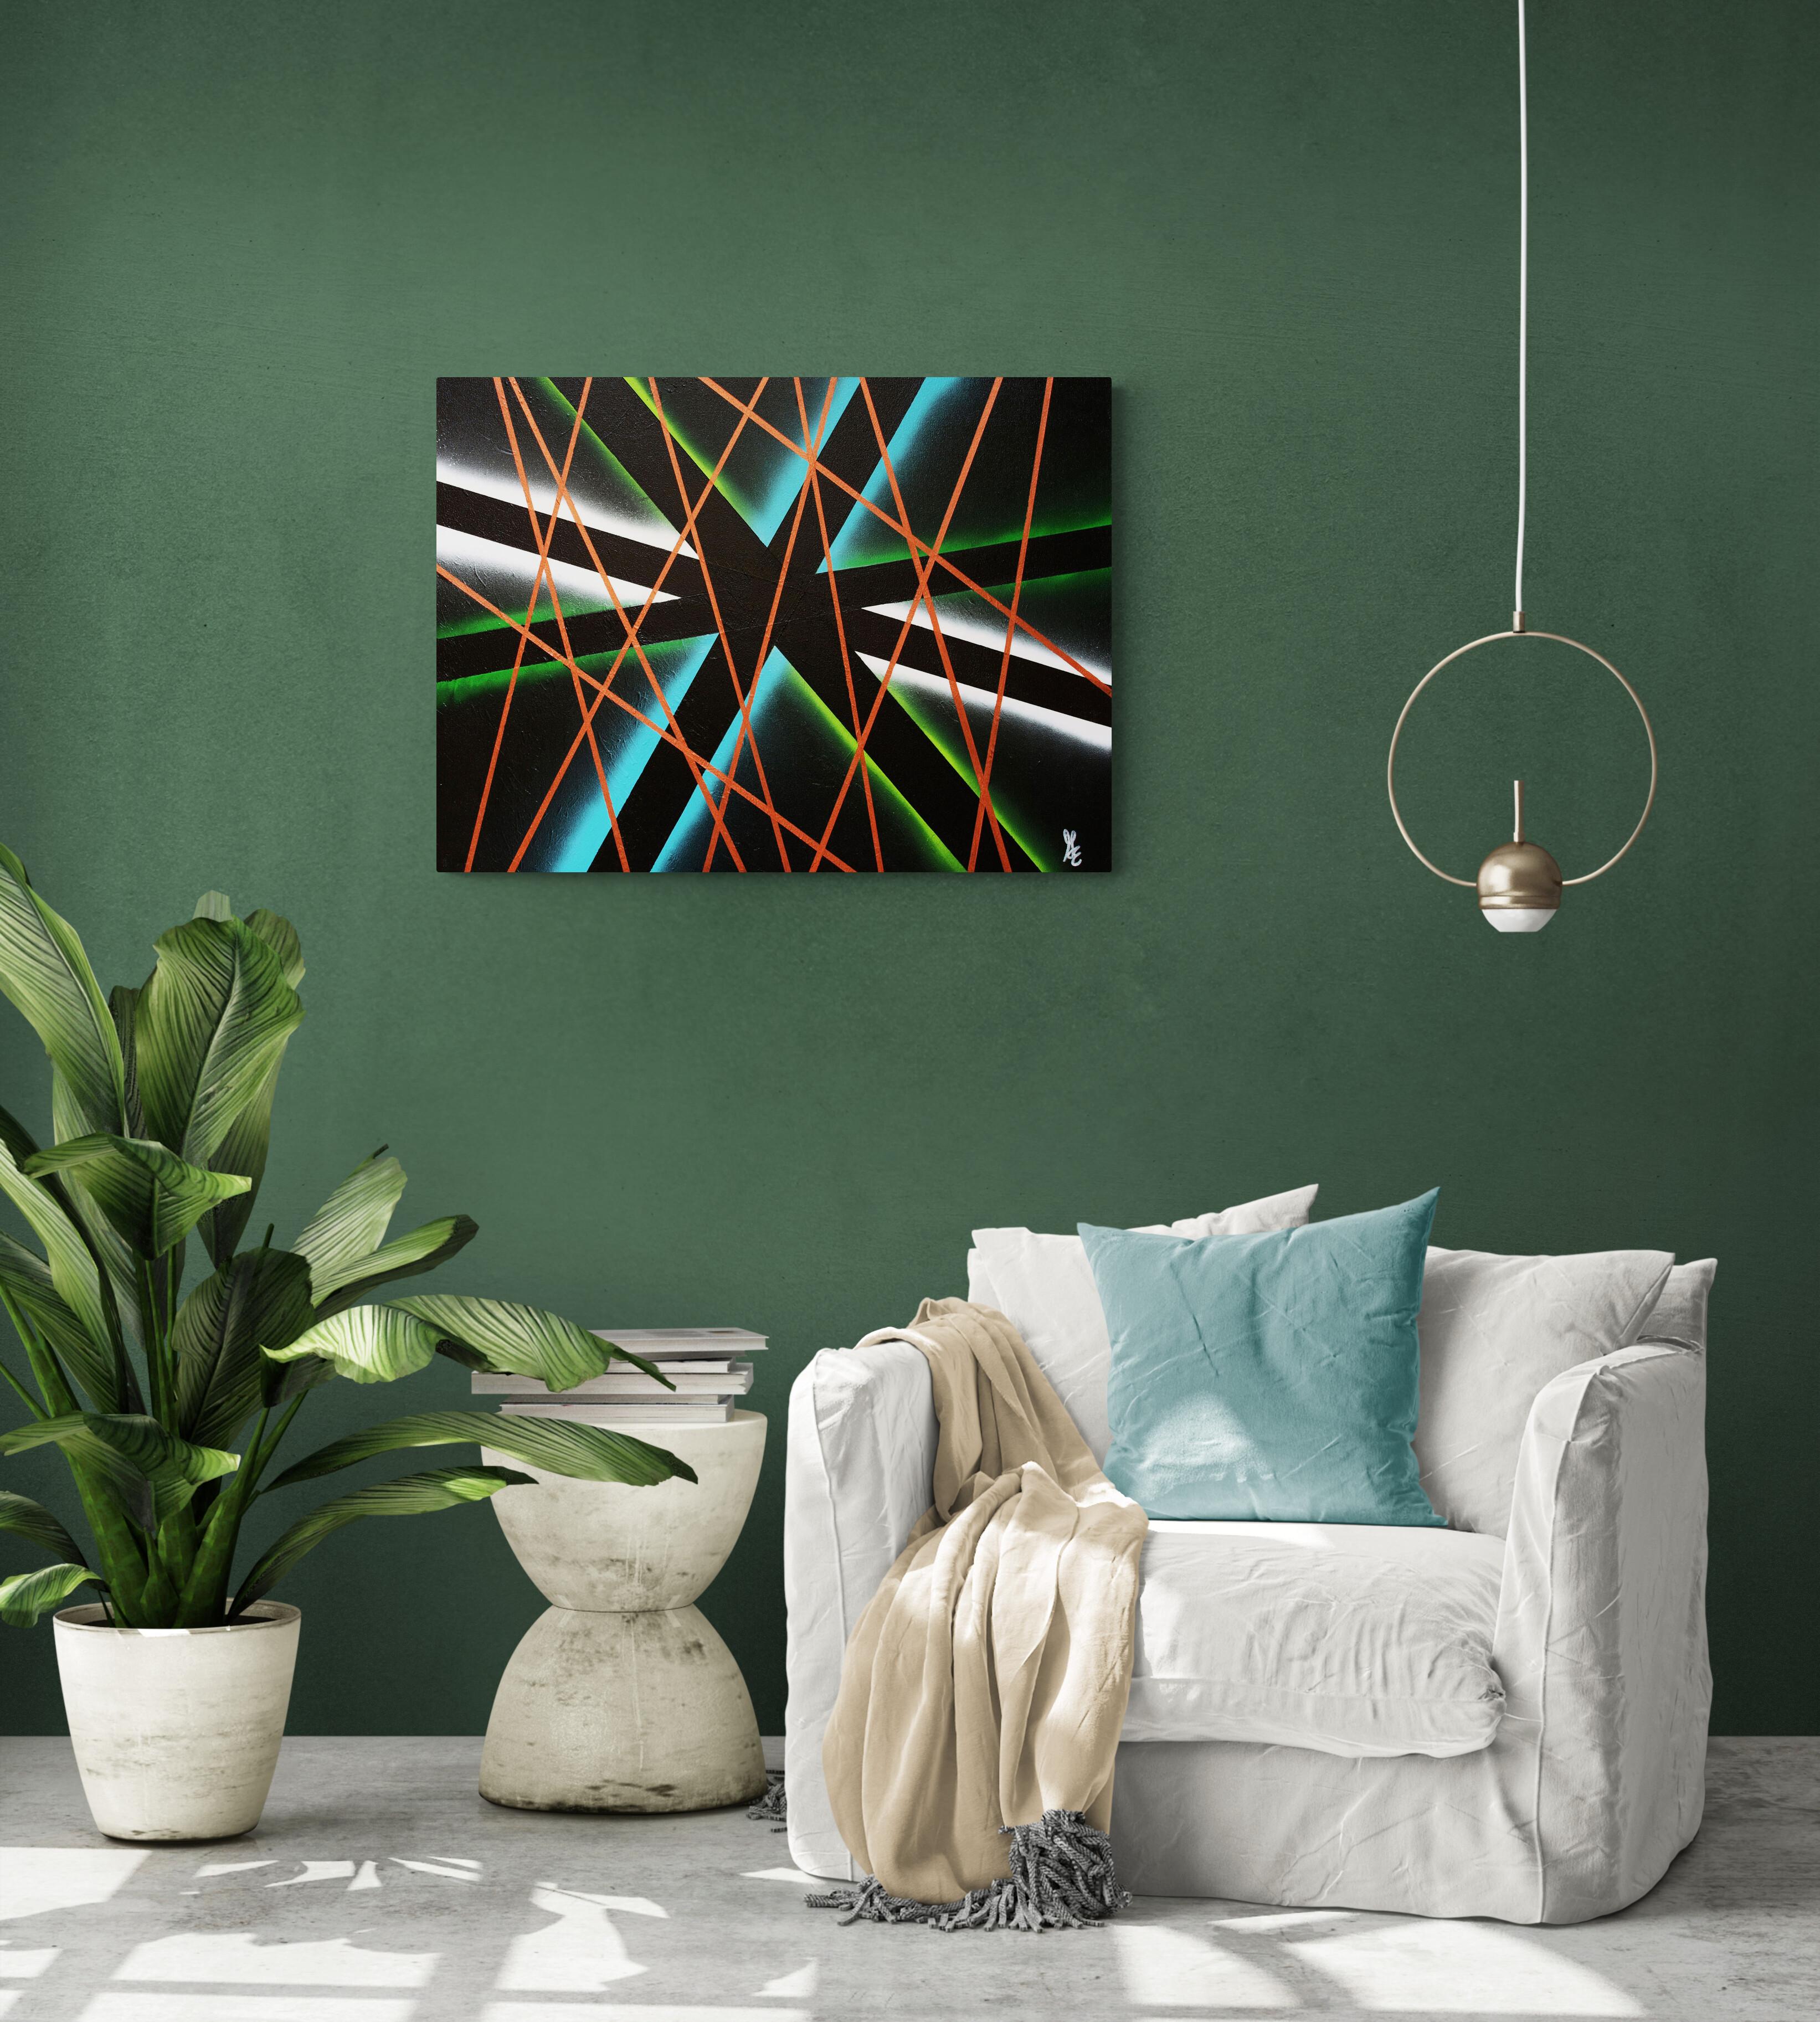 Making Connections, Original Signed Contemporary Geometric Abstract Painting For Sale 2